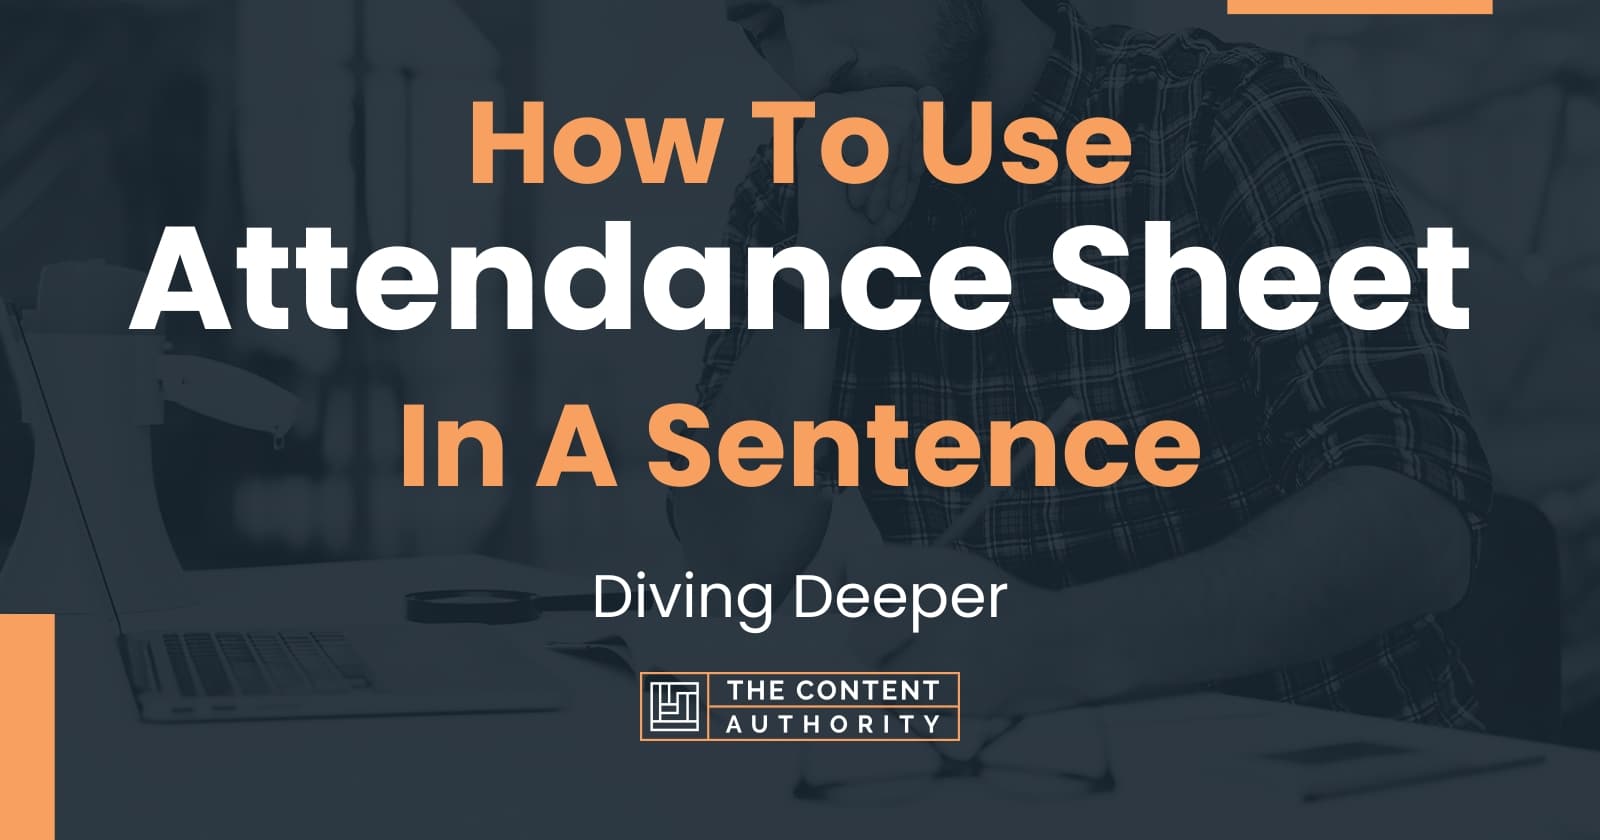 how-to-use-attendance-sheet-in-a-sentence-diving-deeper